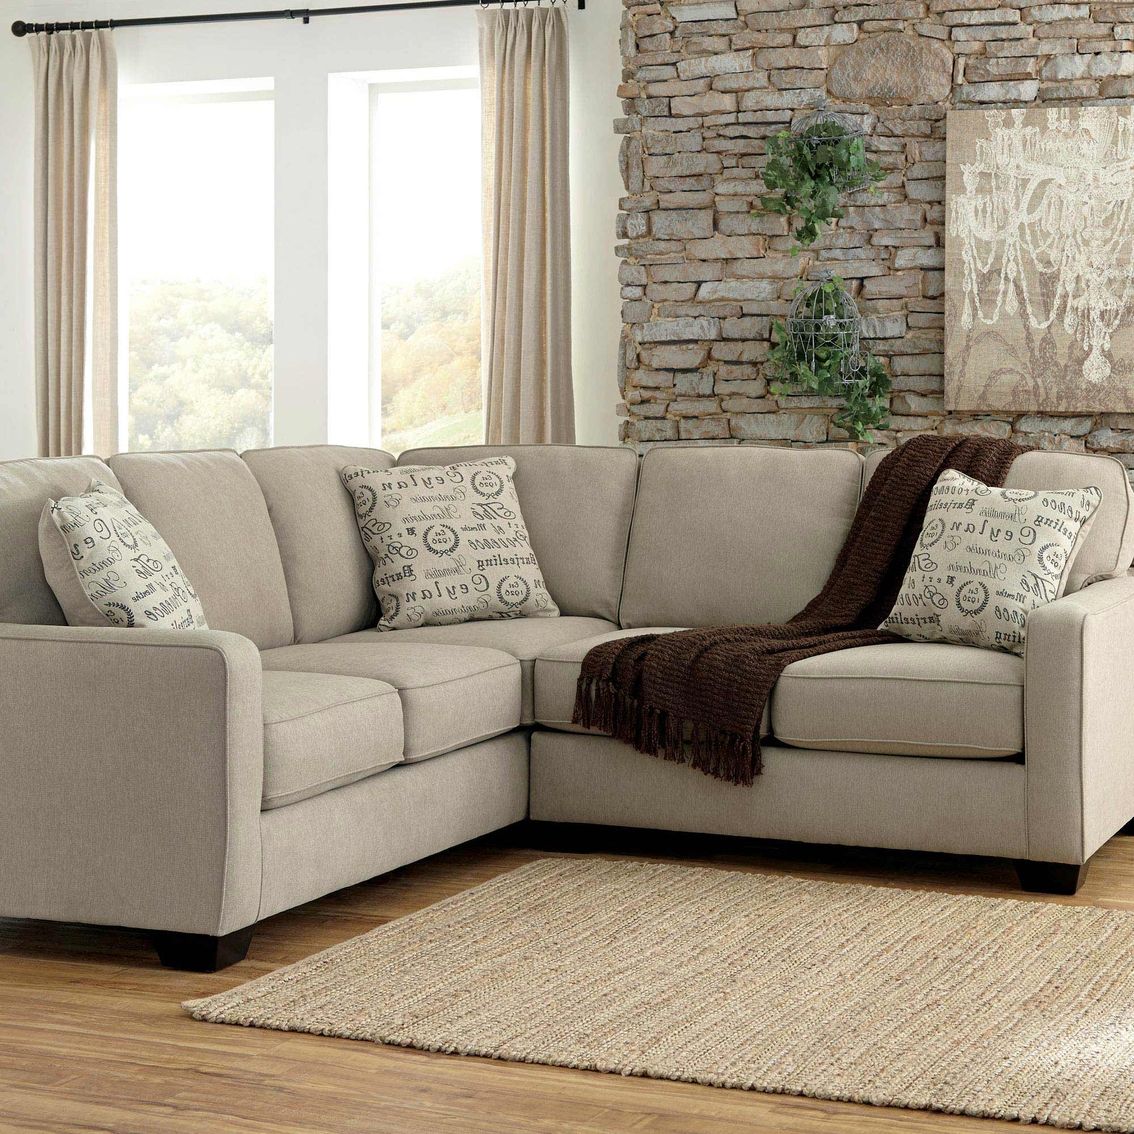 Small 2 Pc Sectional Sofa Kerri Charcoal 2 Piece Sectional Within 2Pc Burland Contemporary Sectional Sofas Charcoal (View 11 of 15)